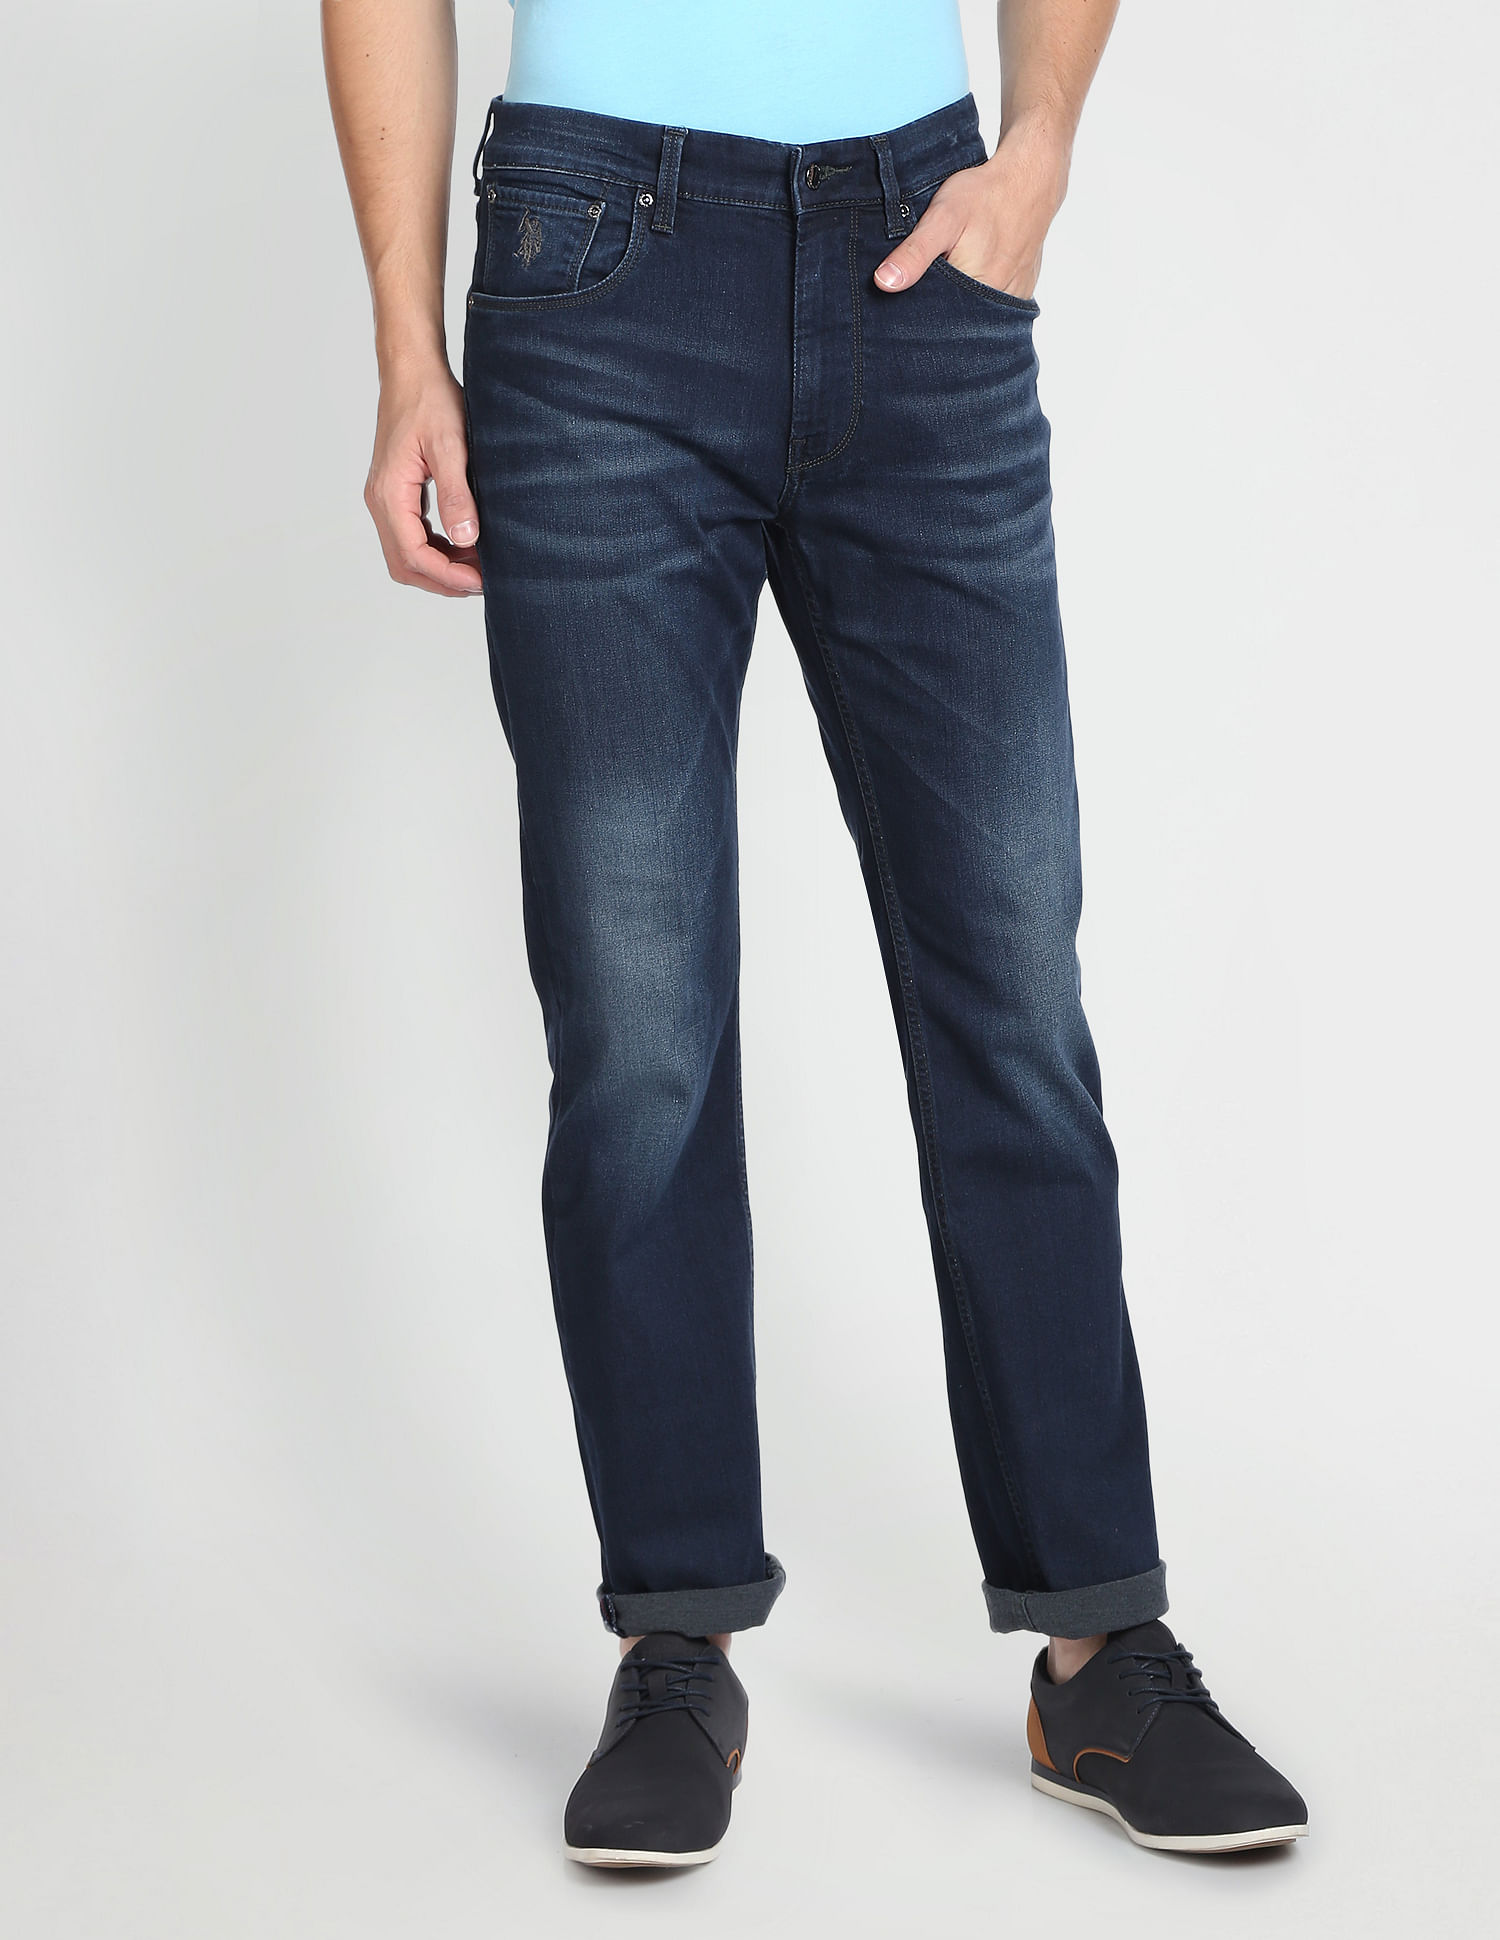 Men's Stonewash Relaxed Fit Classic 5-Pocket Denim Jeans by Field & Forest  at Fleet Farm